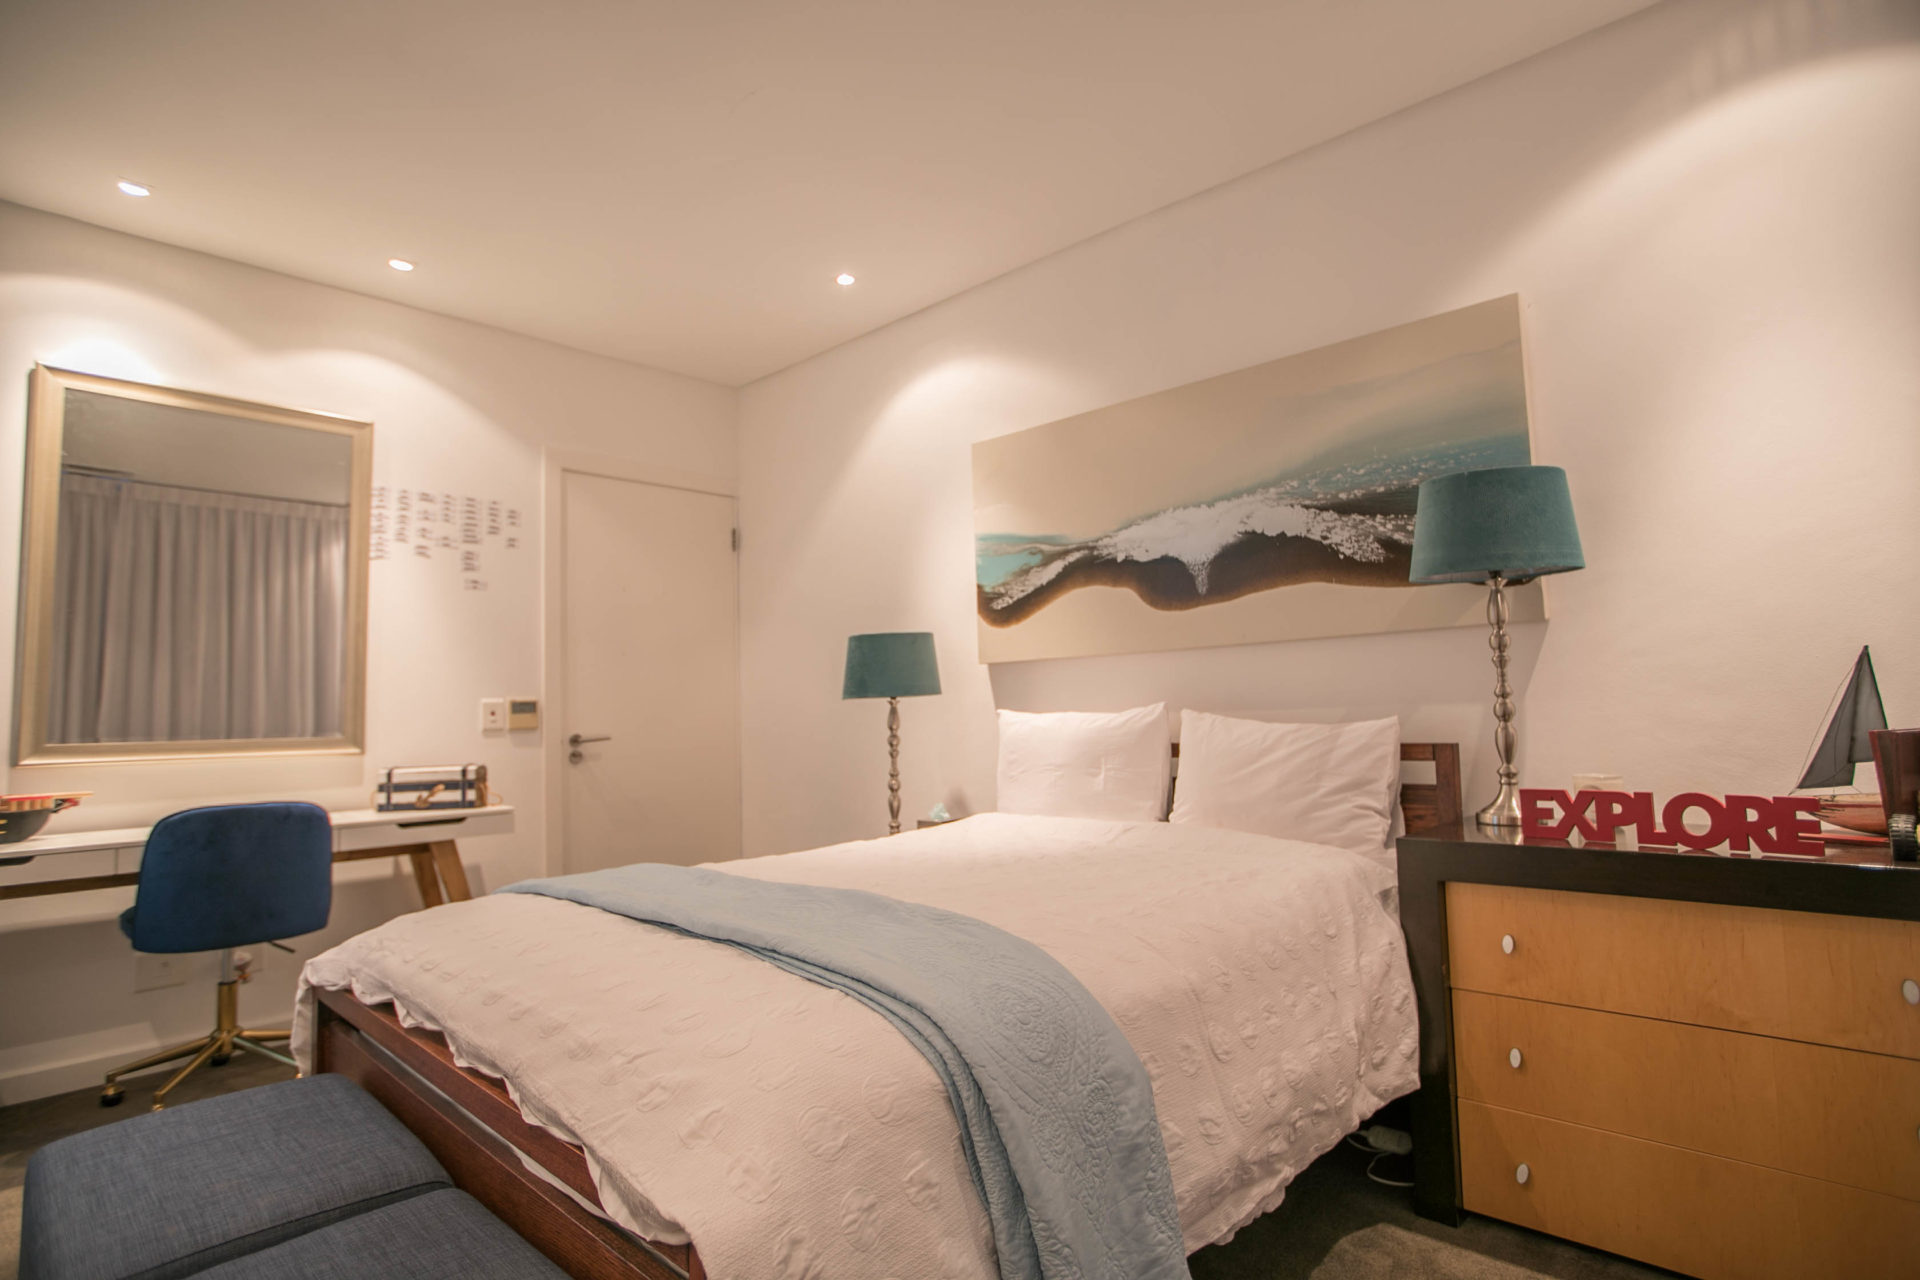 Photo 3 of Glen Hideaway accommodation in Camps Bay, Cape Town with 6 bedrooms and 6 bathrooms